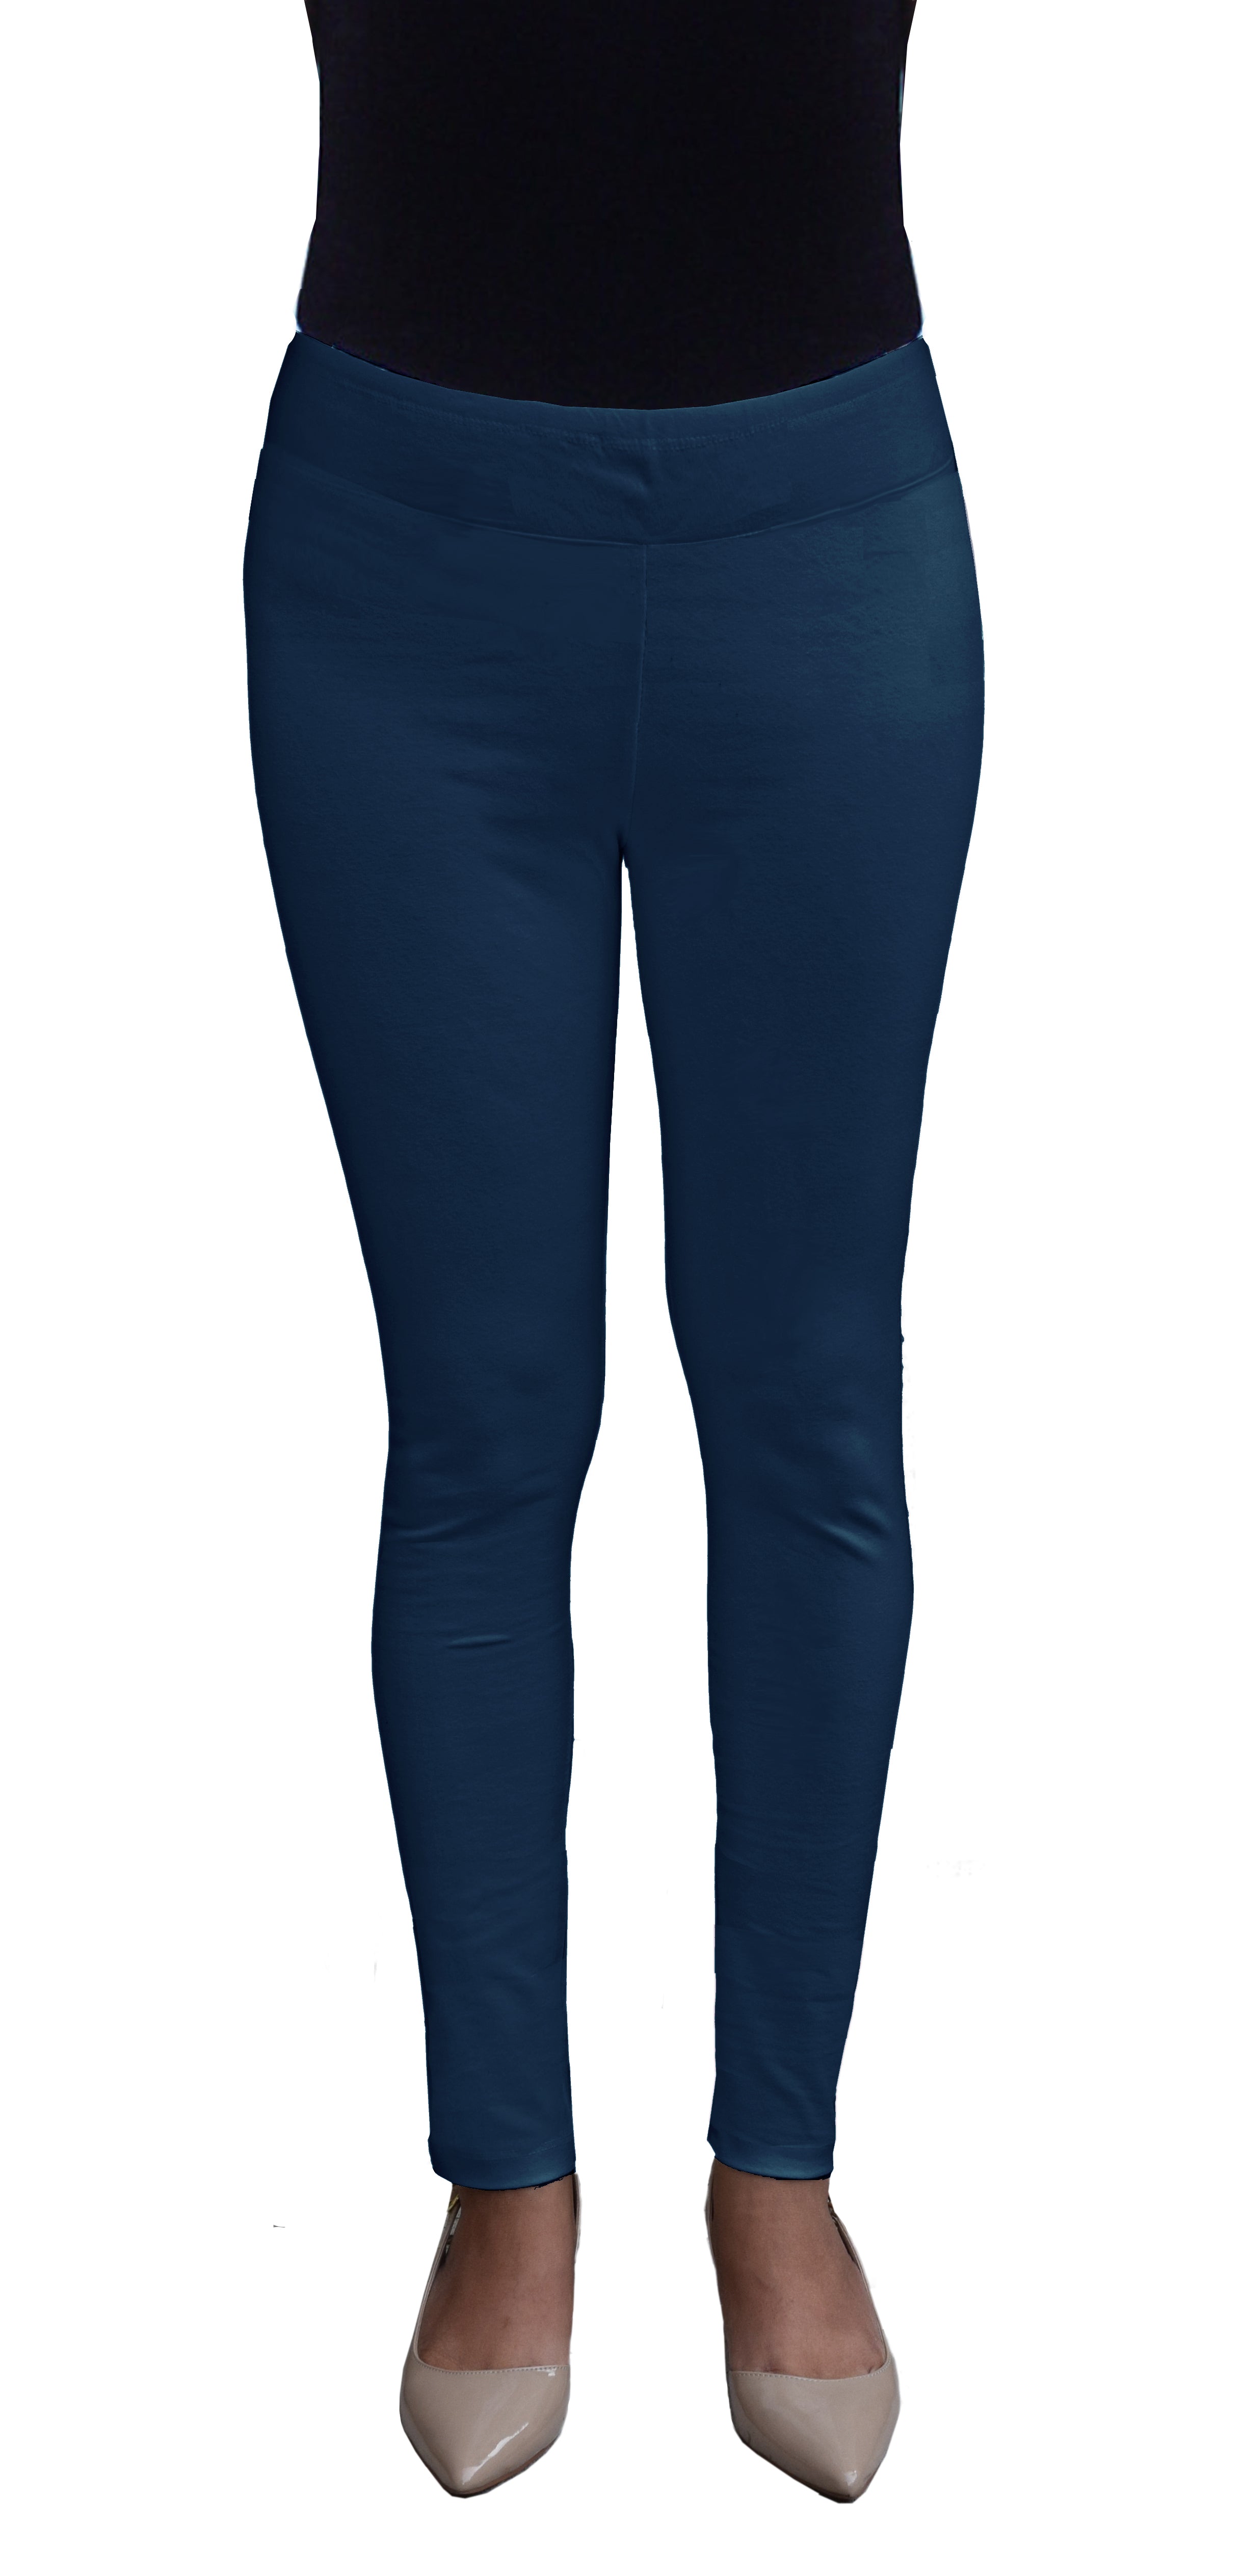 Cotton Spandex Ankle-Length Leggings- Buy Now from Snazzyway